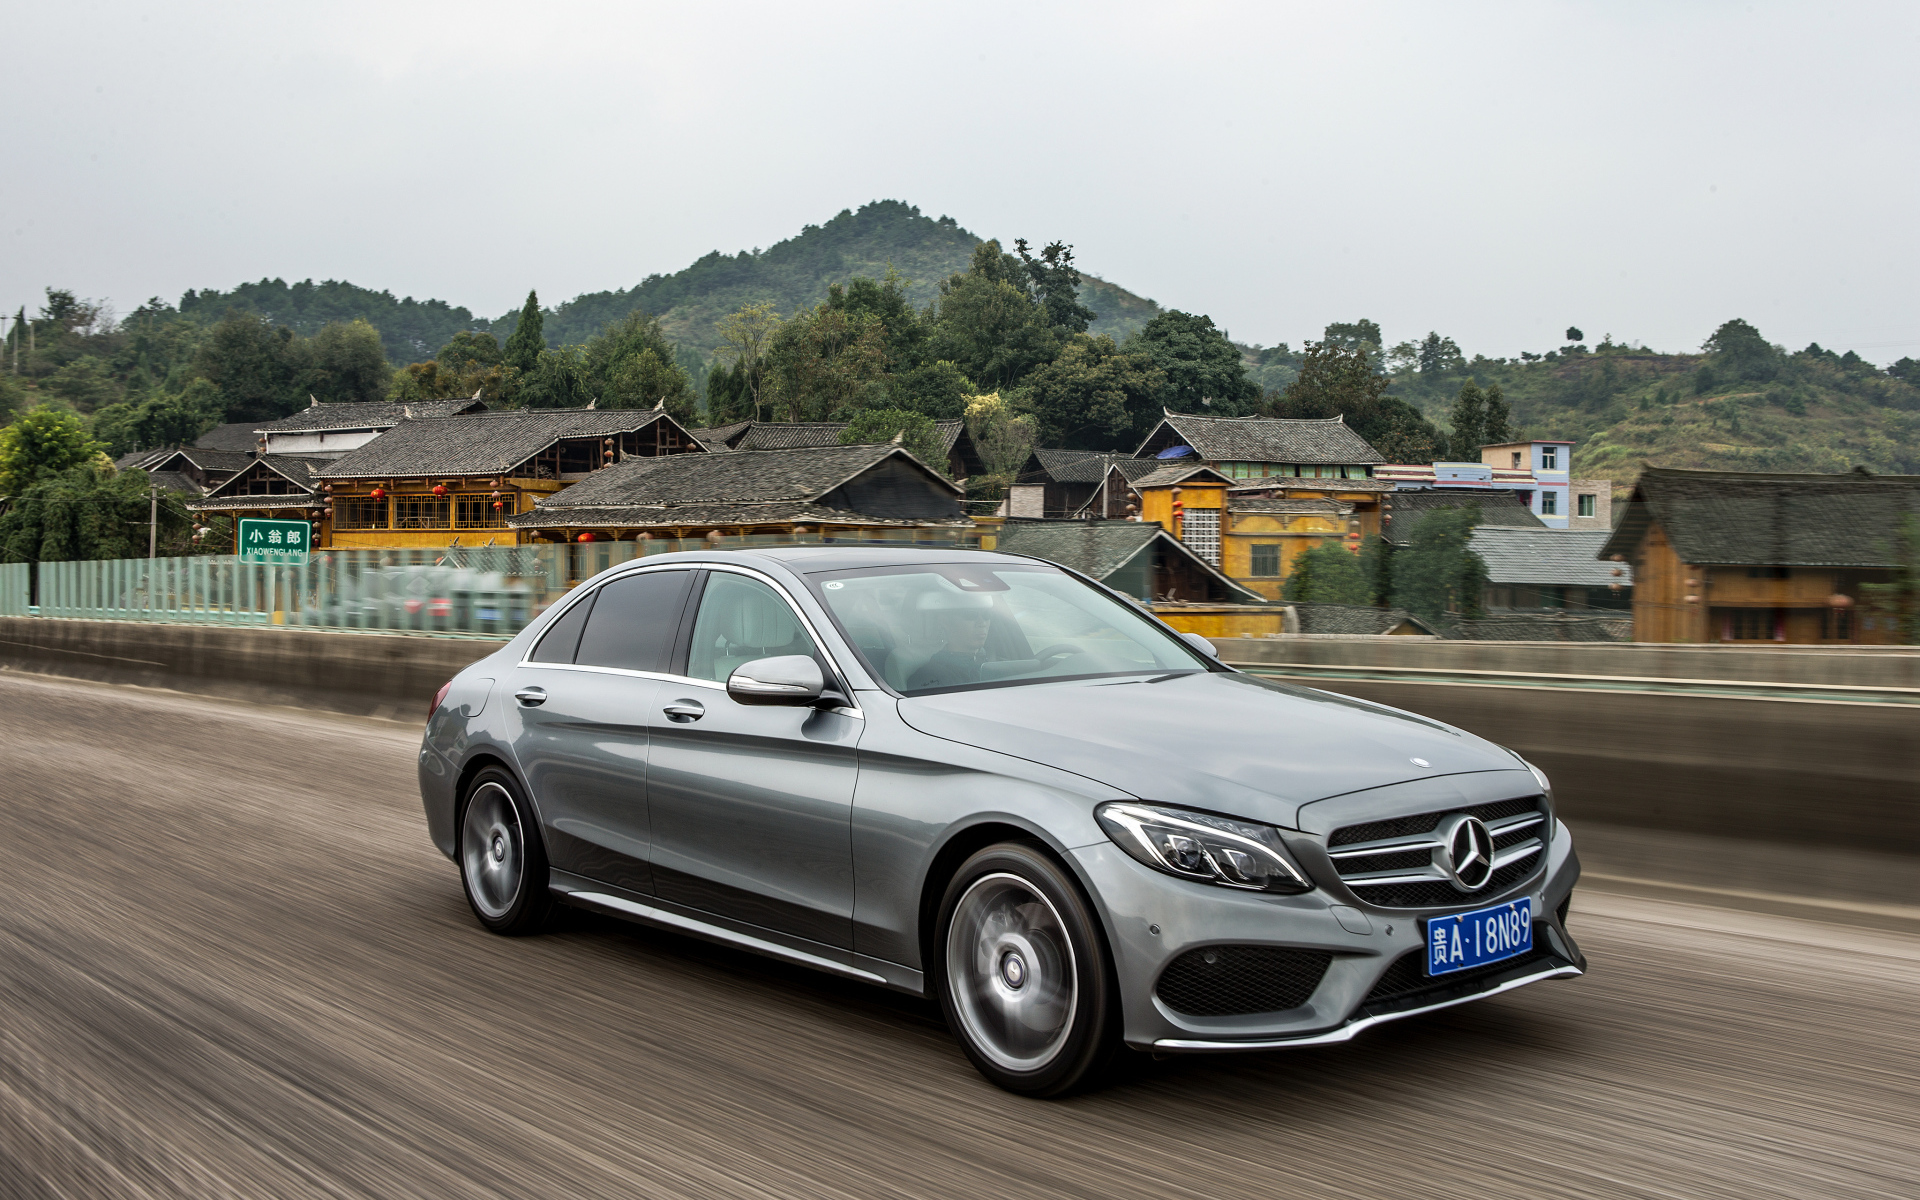 Silver car Mercedes-Benz C-Class on the track